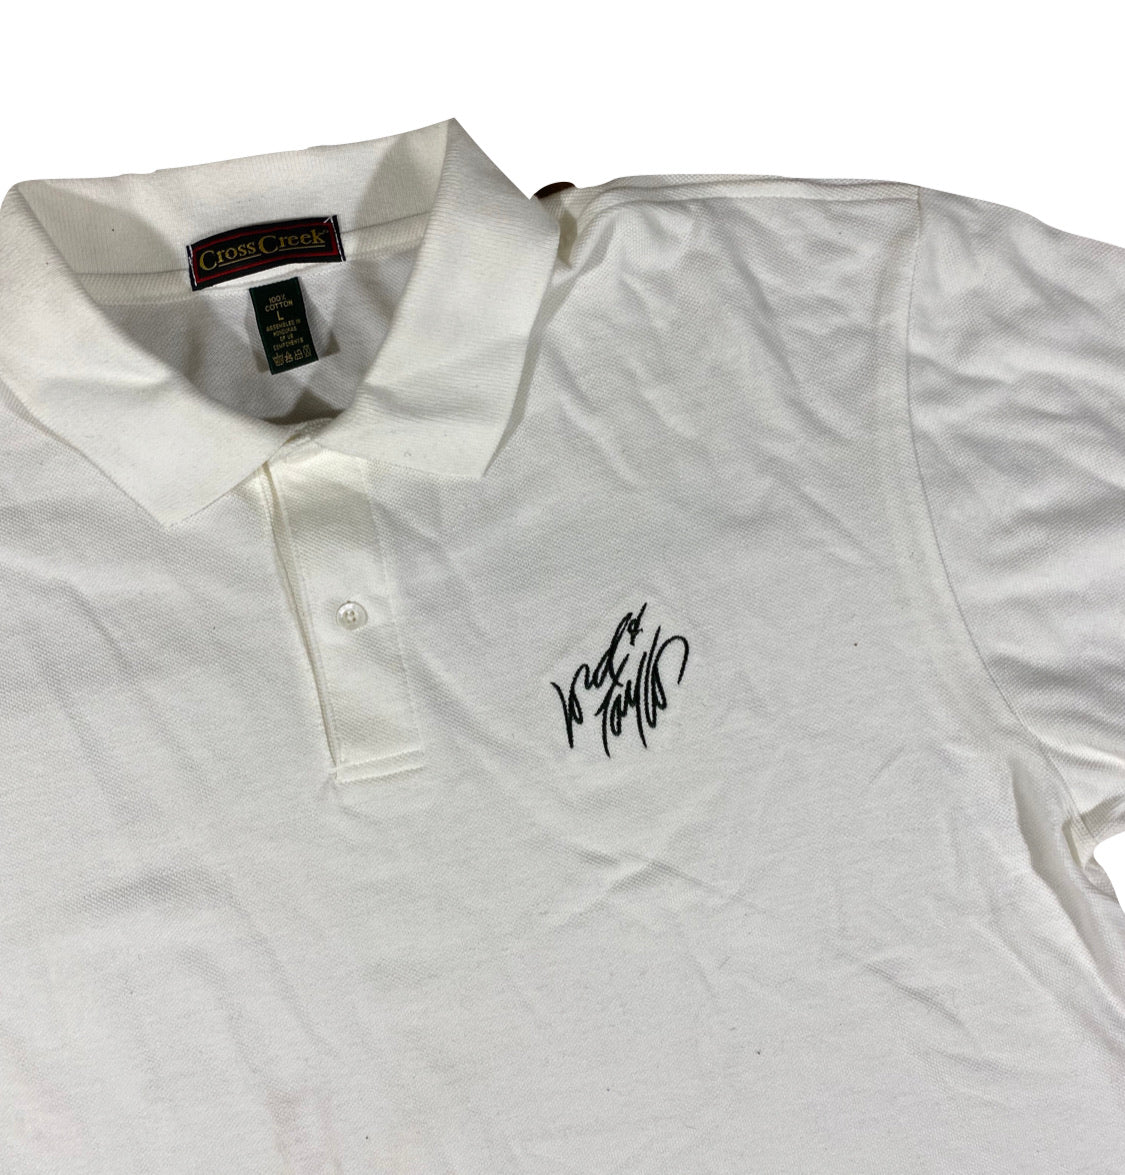 lord and taylor polo